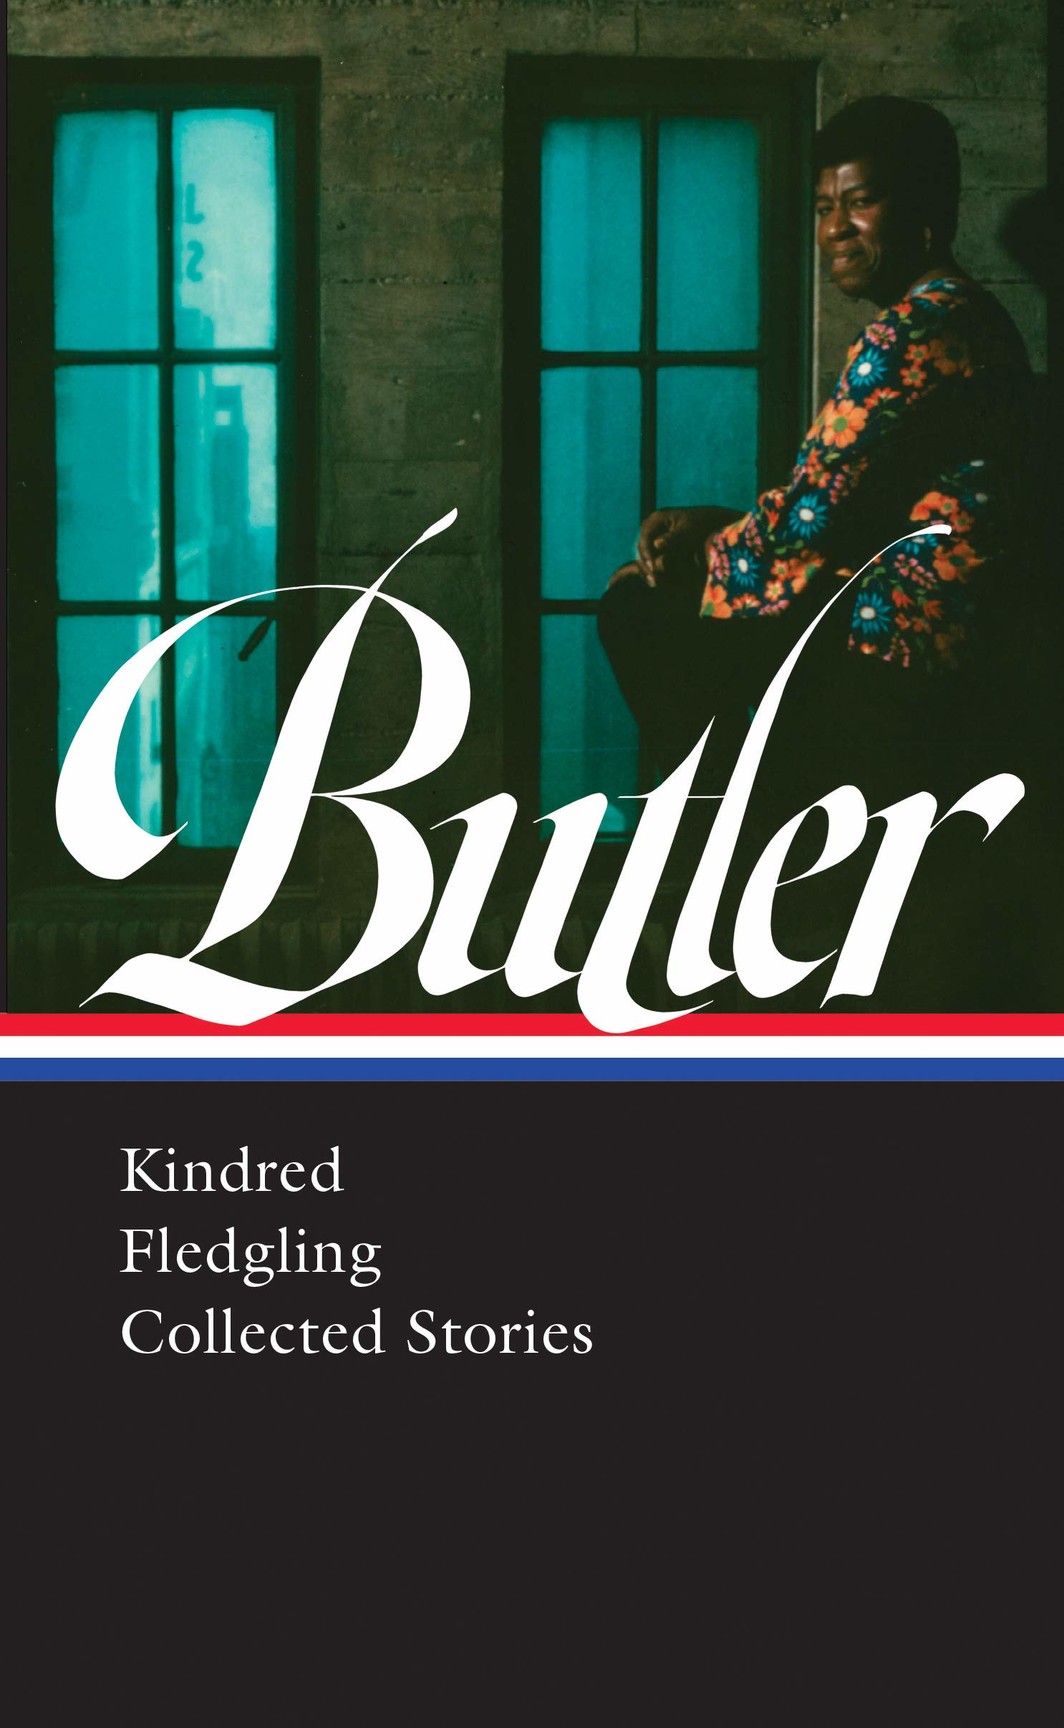 The cover of Octavia E. Butler: Kindred, Fledgling, Collected Stories